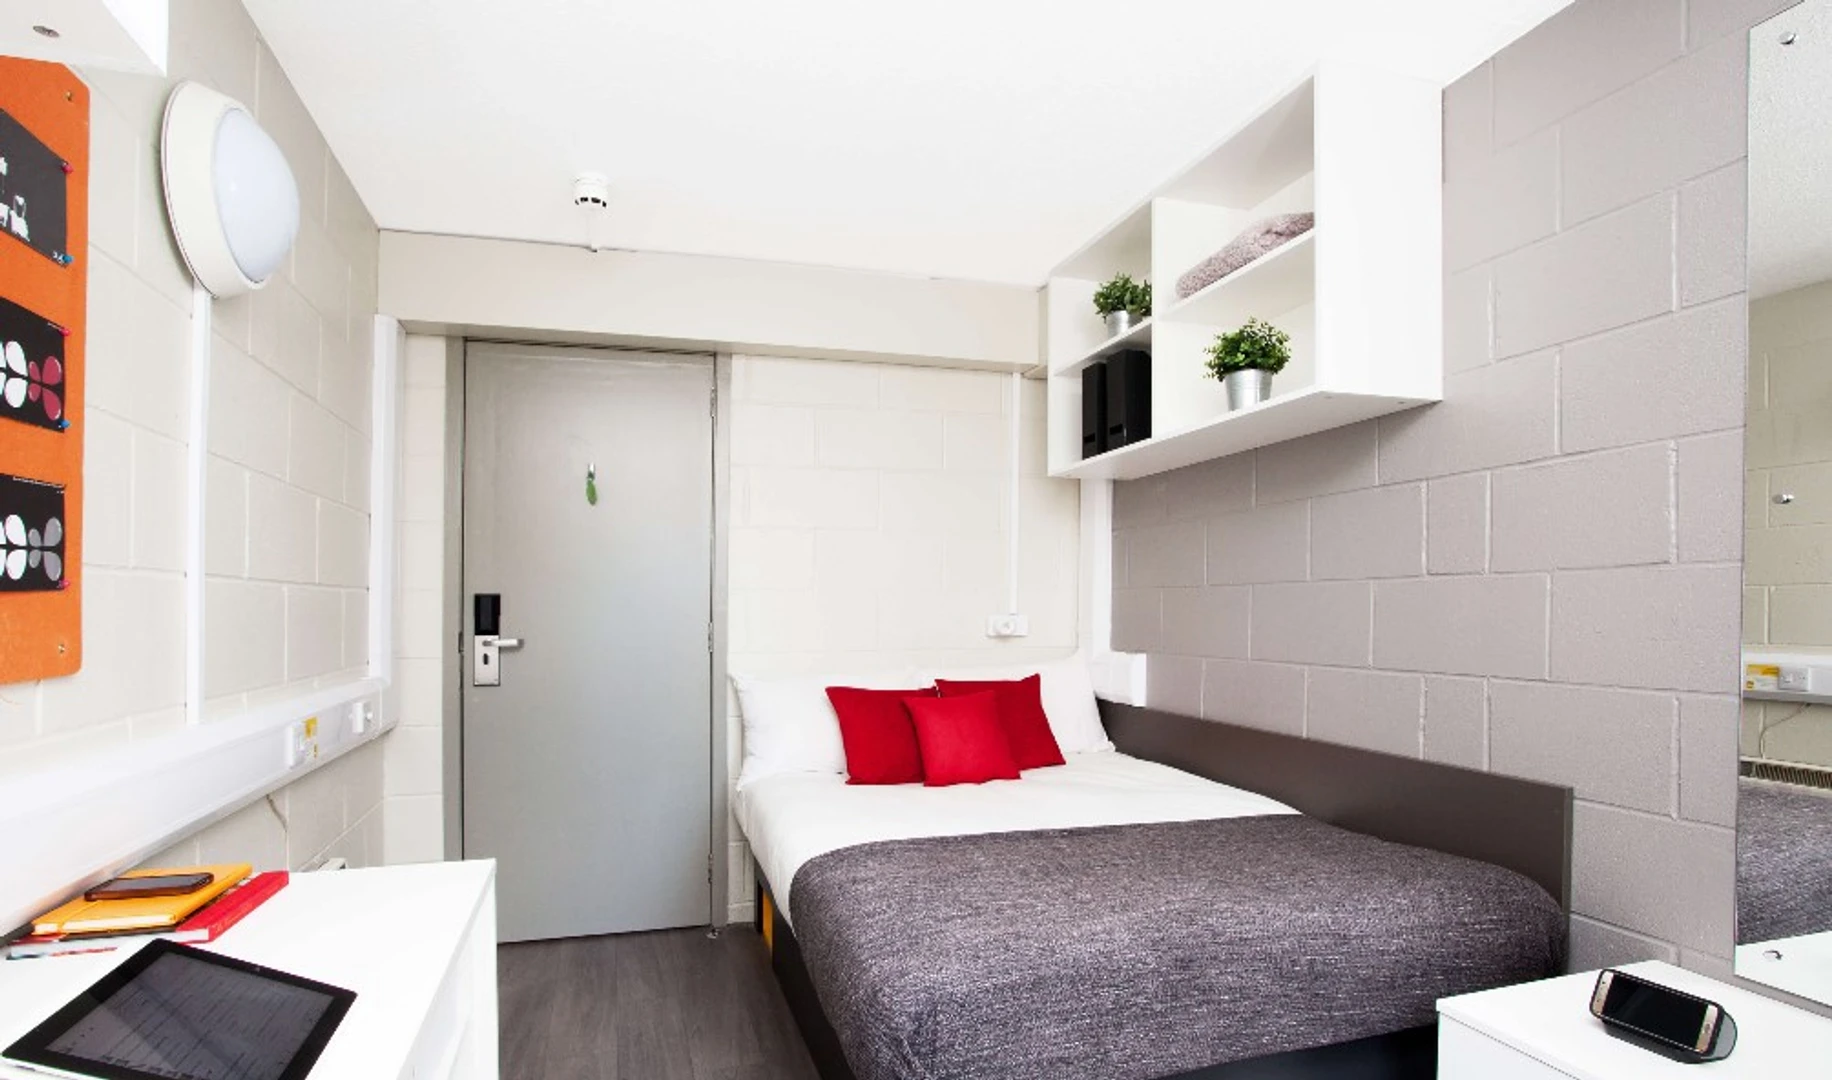 Accommodation in the centre of Aberdeen